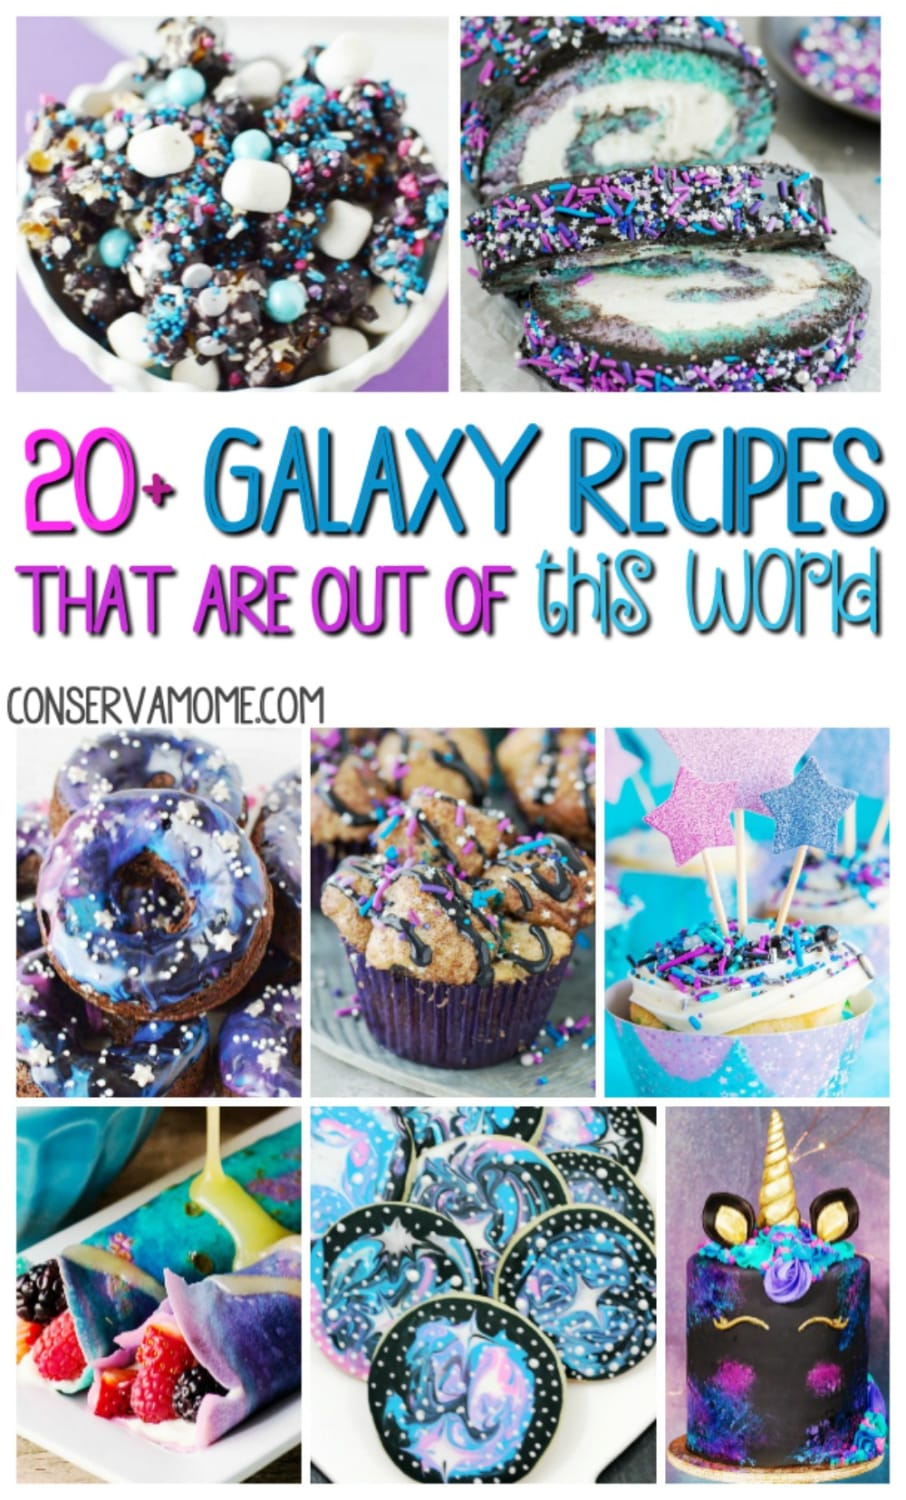 20+ Glaxy Recipes that are out of this world